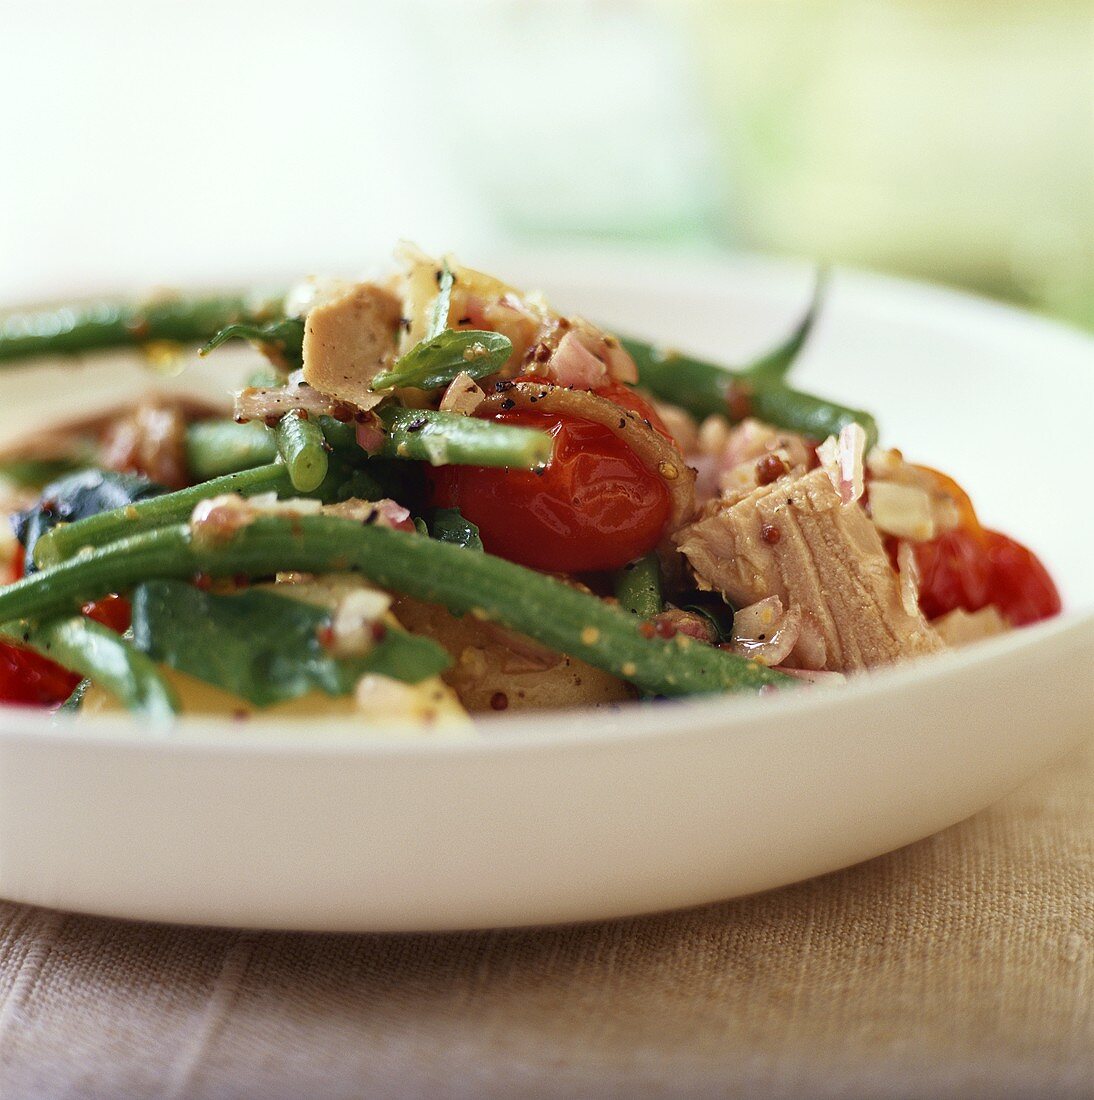 Salade niçoise with green beans, tomatoes and tuna